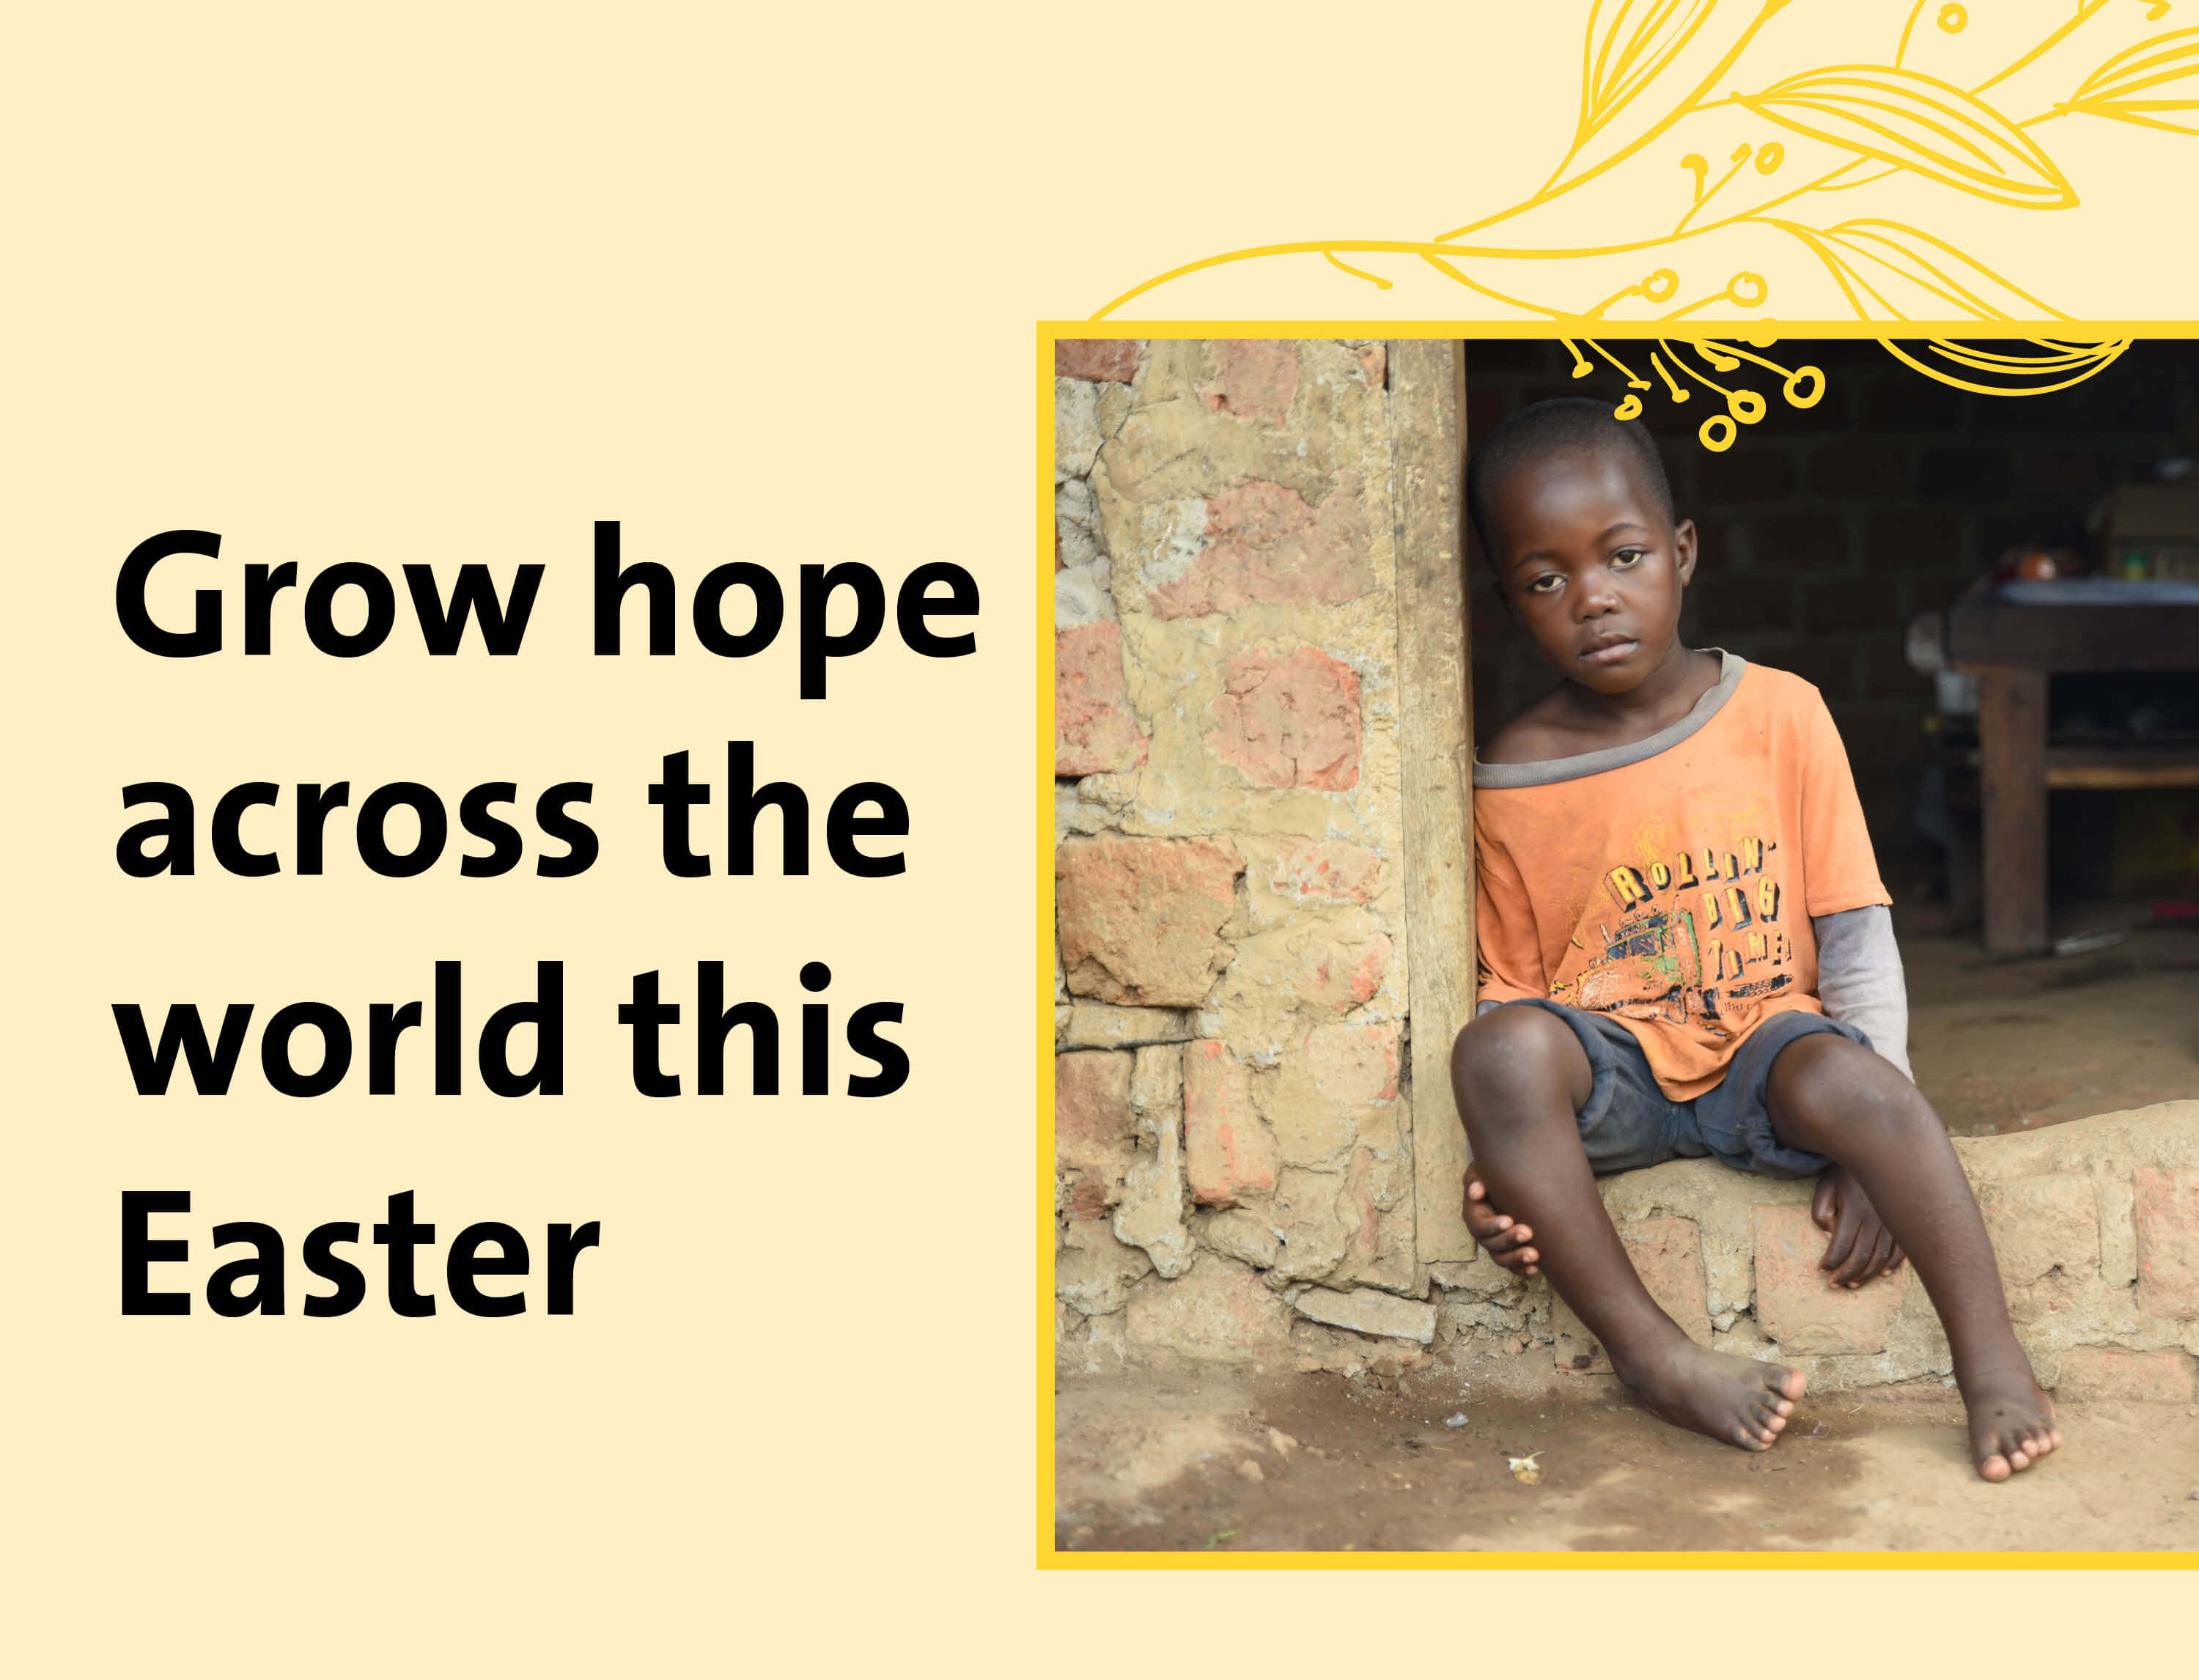 Will you become a Hope Grower this Easter?